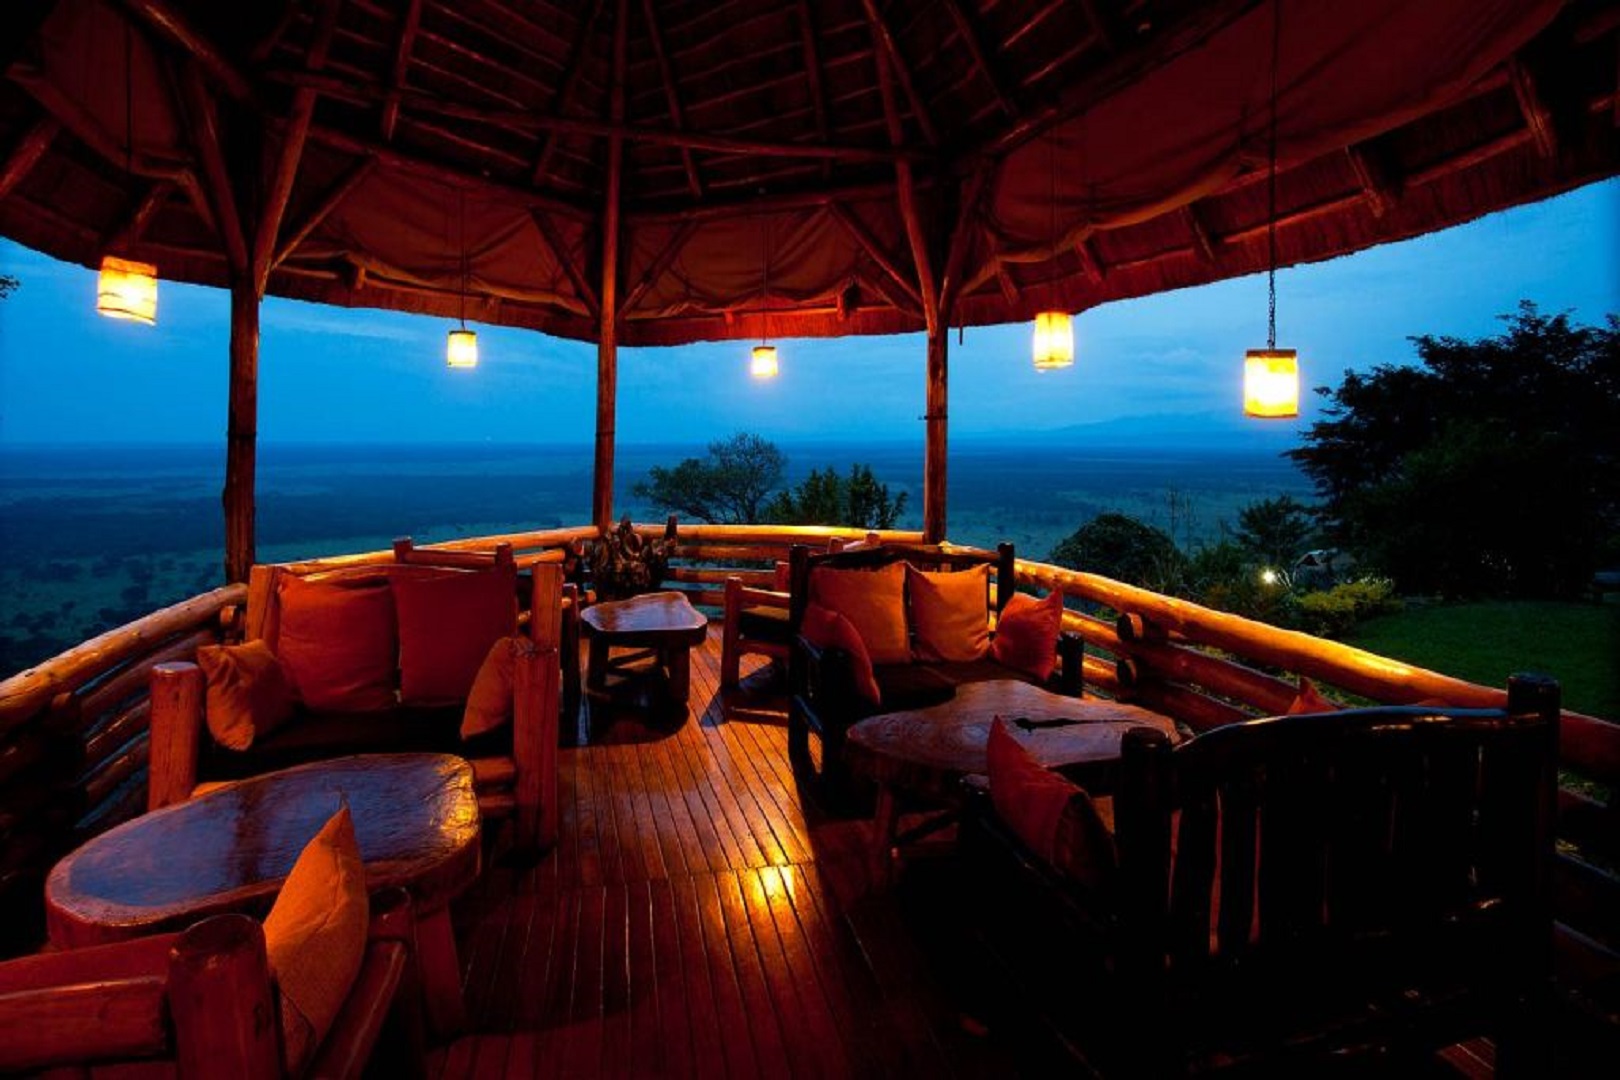 Evening view of the wilderness over the balcony at Katara Lodge, Queen Elizabeth National Park